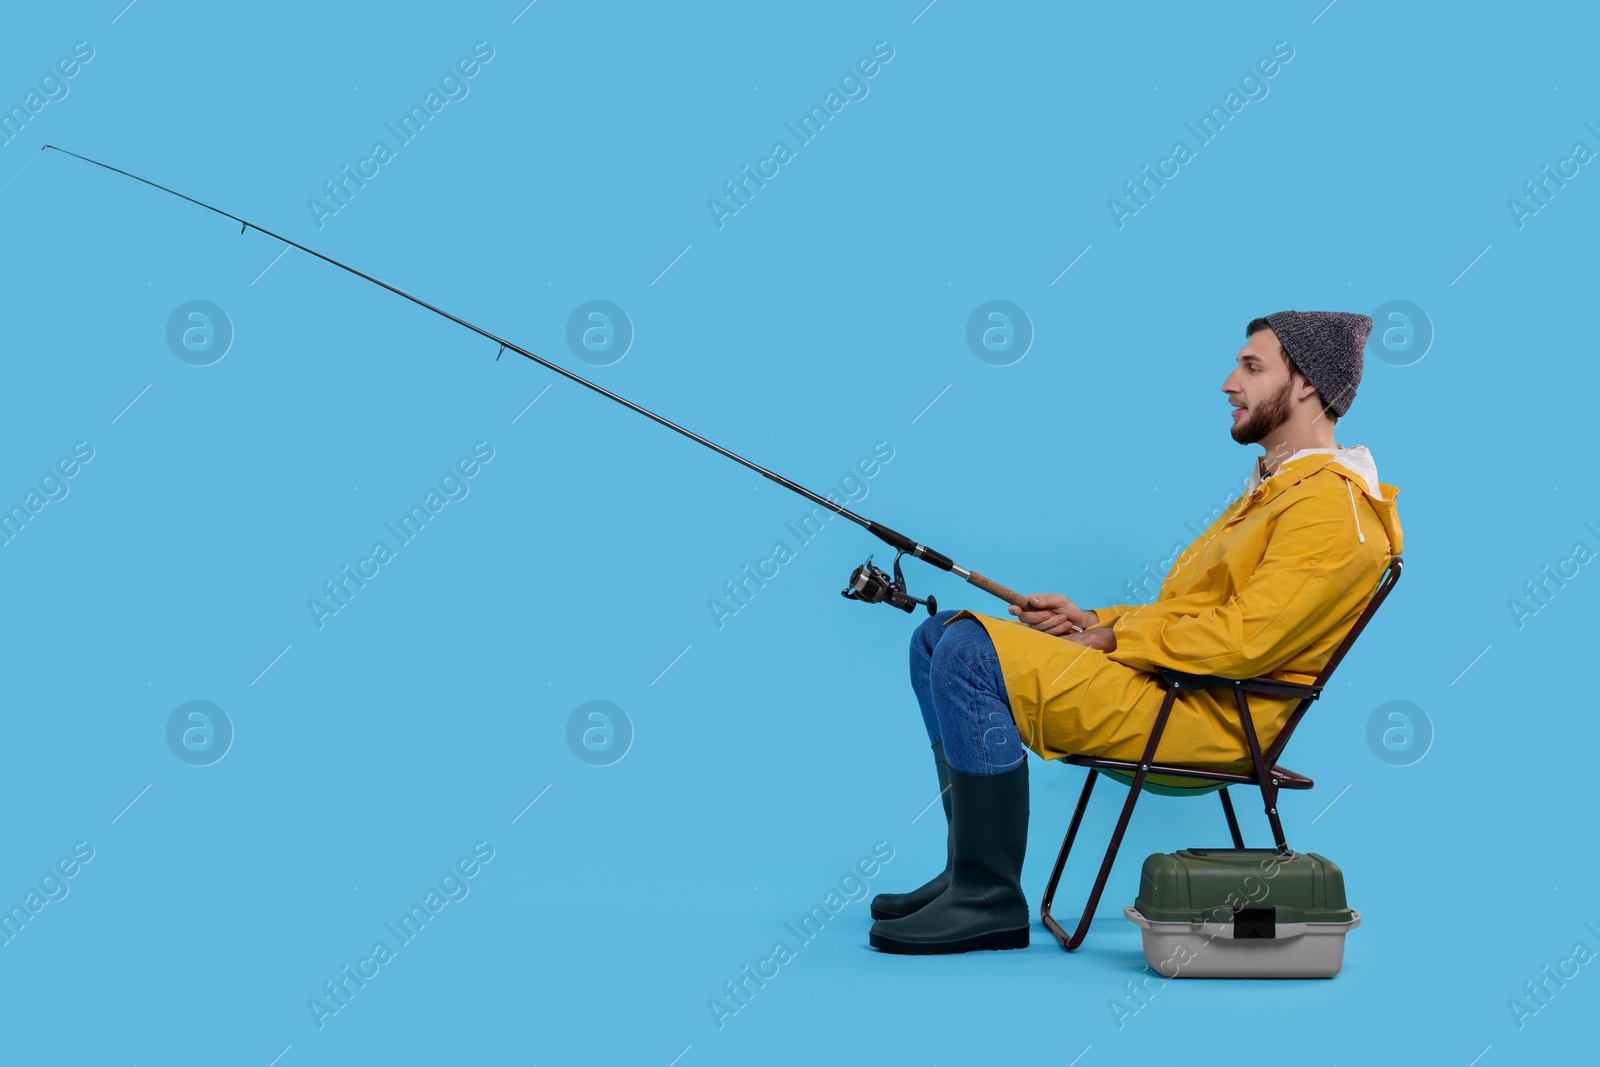 Photo of Fisherman with rod and tackle box on chair against light blue background